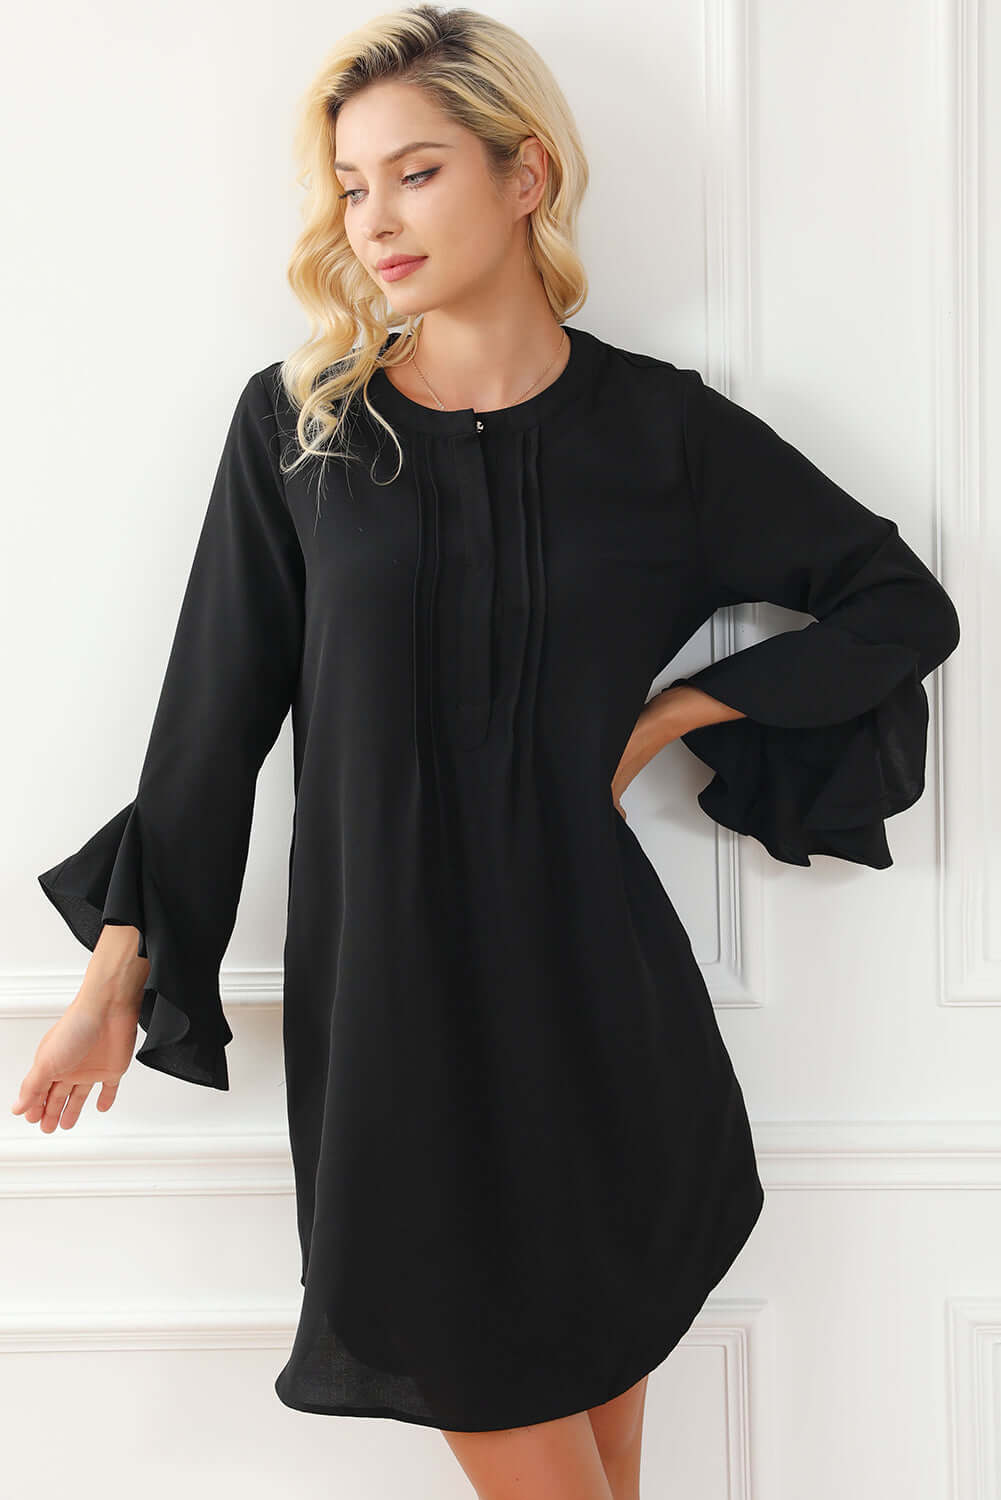 Black Solid Color Flounce Splicing Sleeve Mini Shift Dress - Dixie Hike & Style